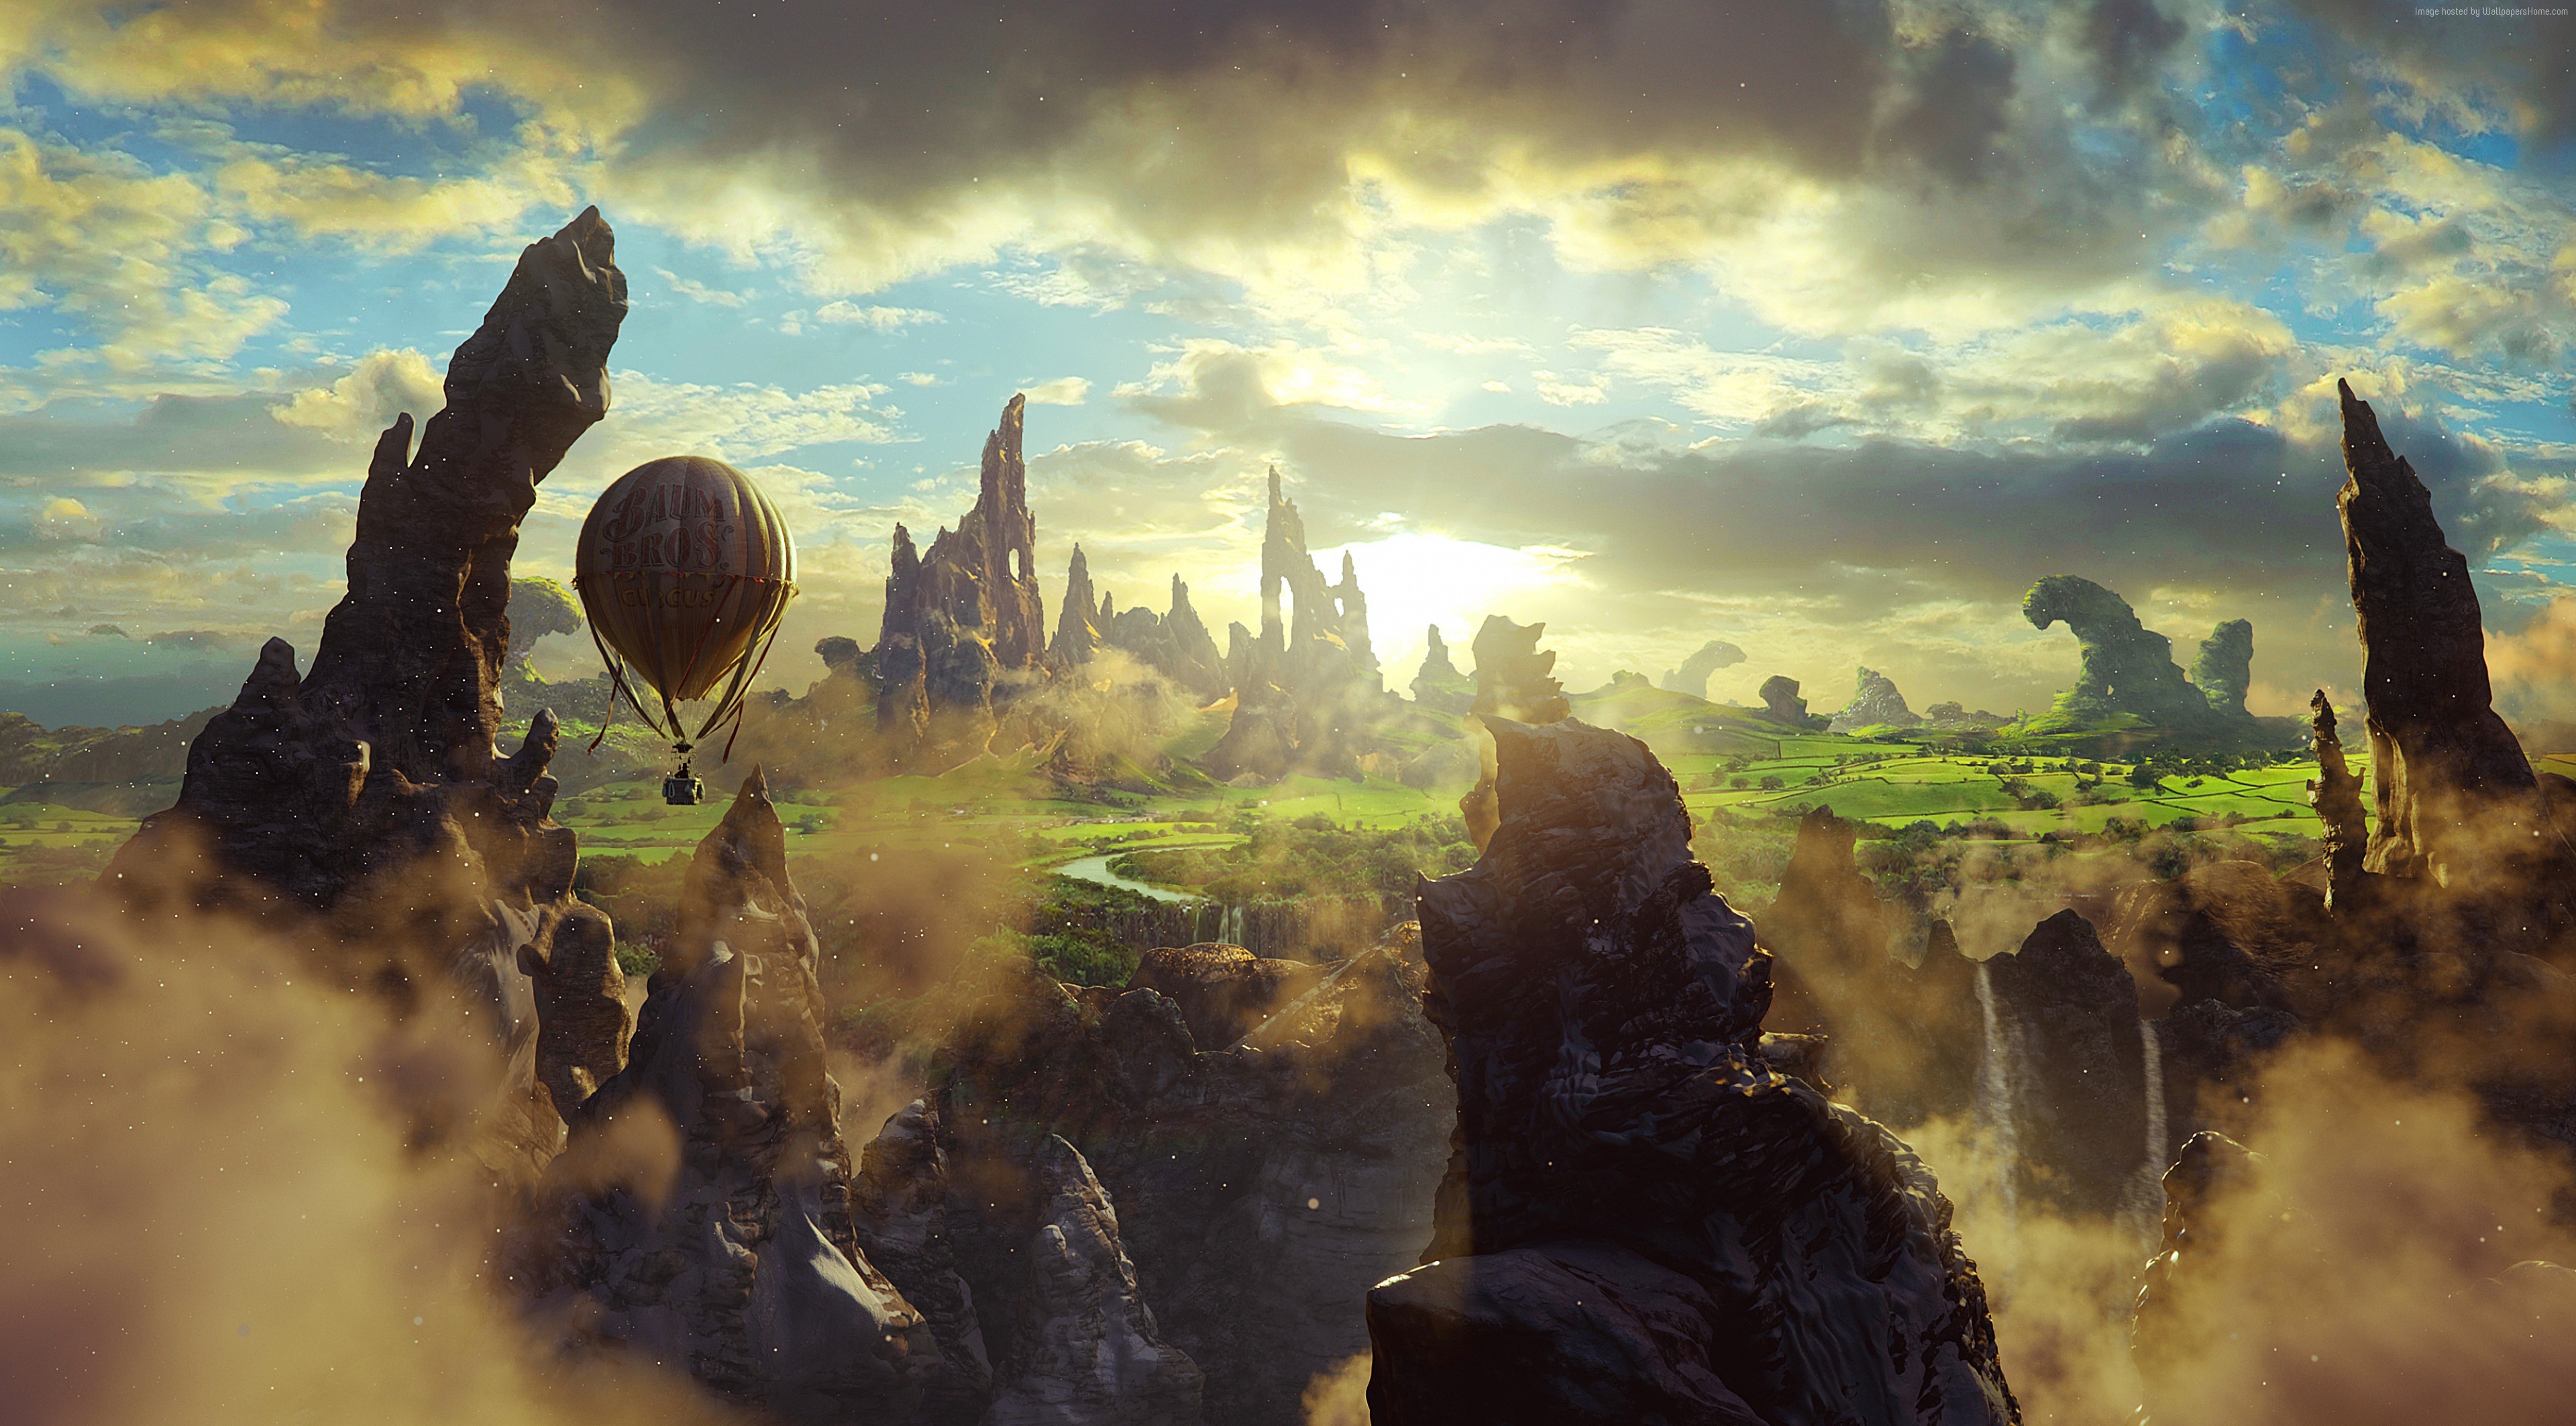 3840x2125 Oz: the Great and Powerful, 4k, 5k wallpaper, fantasy, cliffs, ...